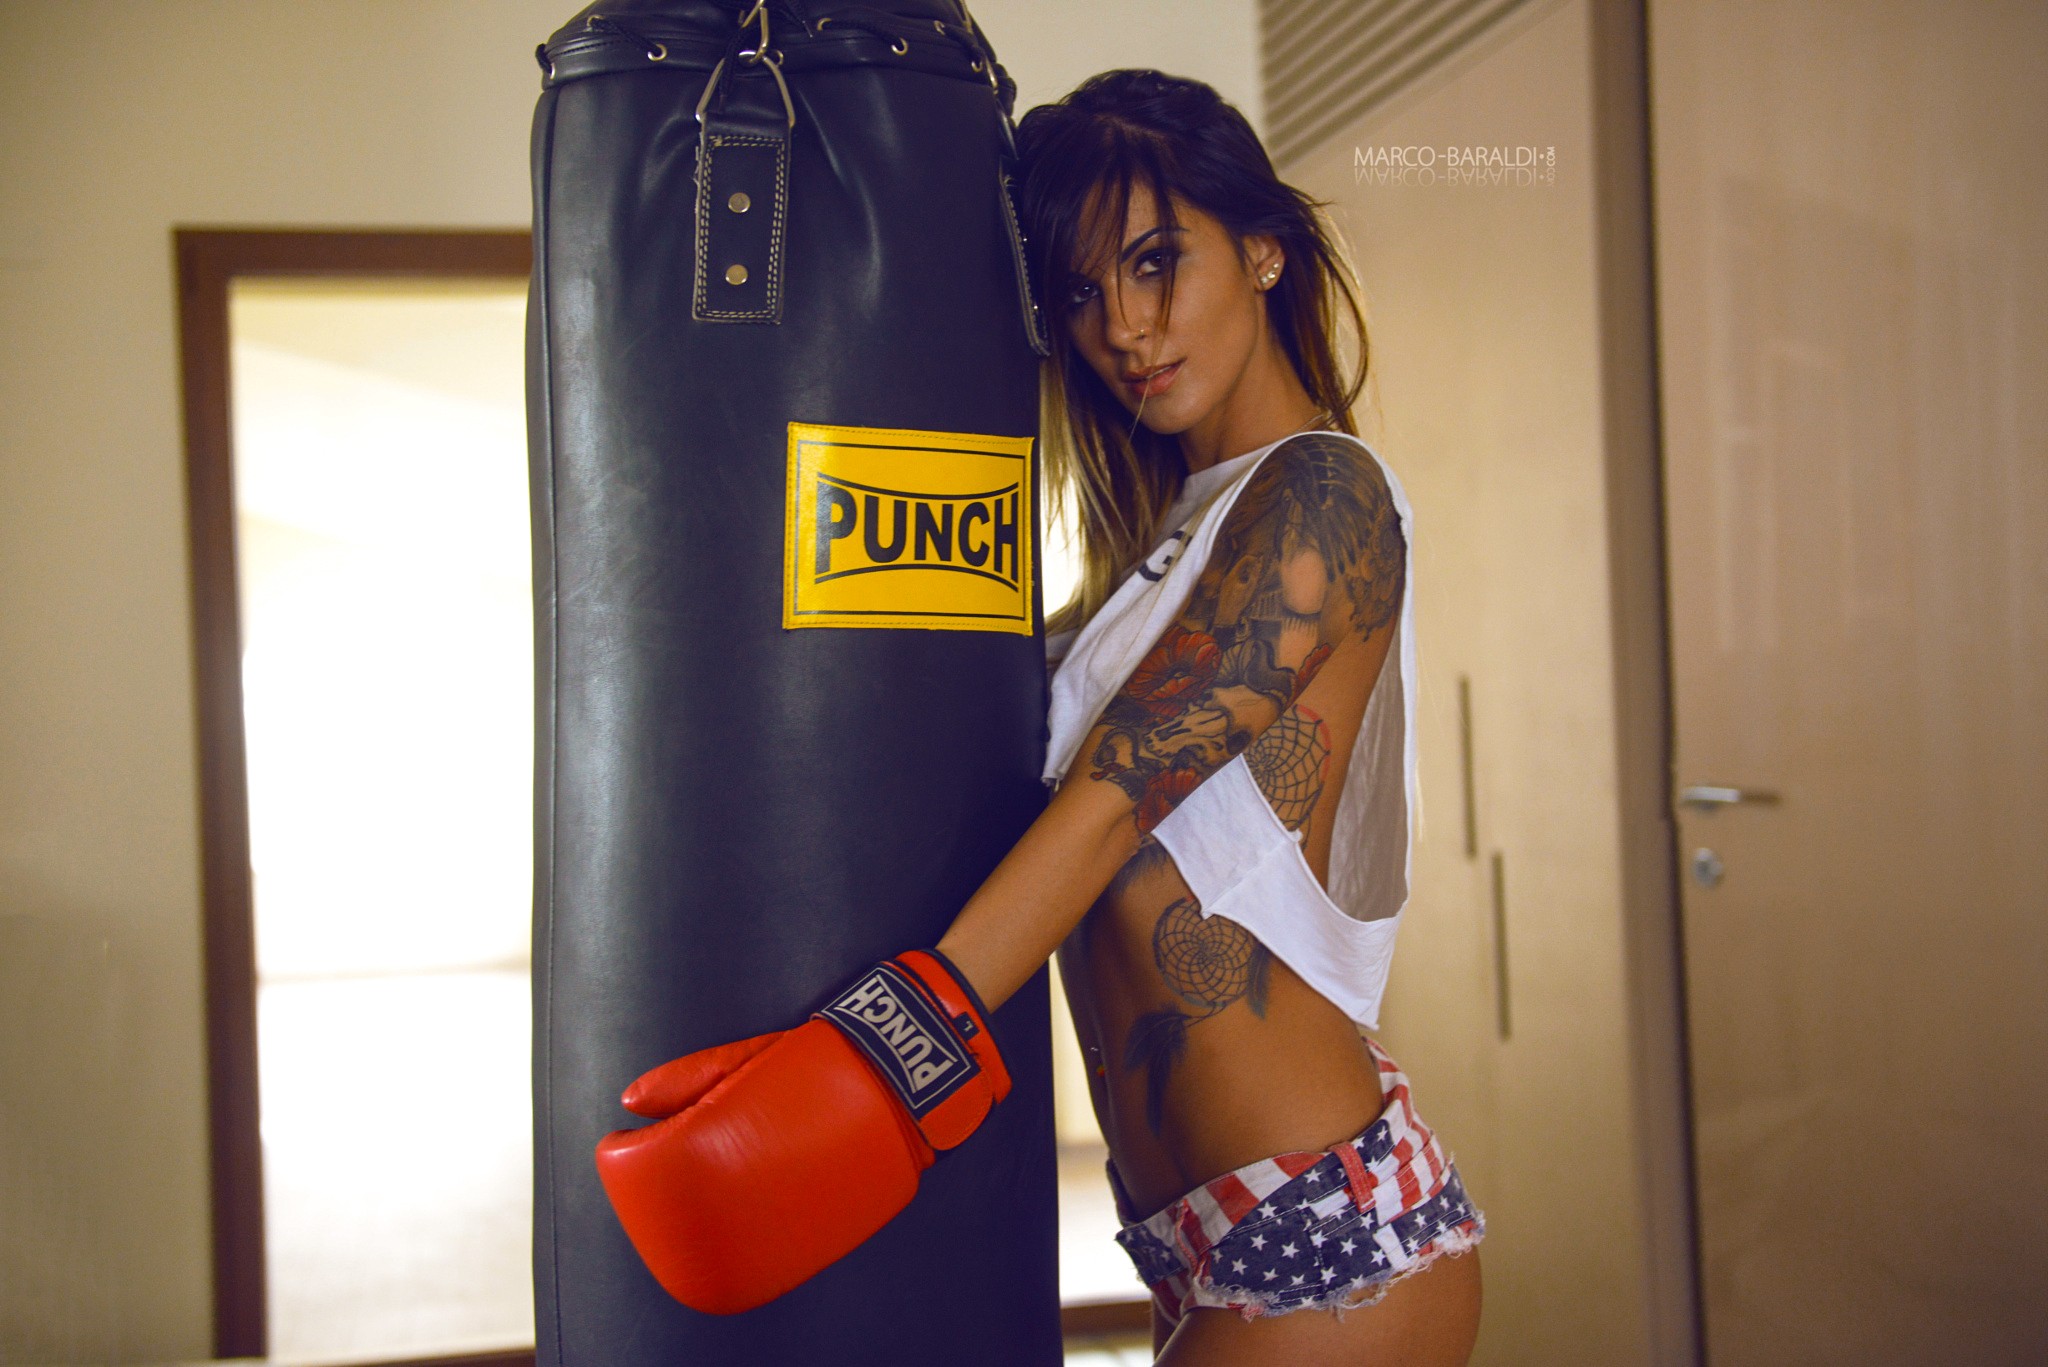 People 2048x1367 women shorts tattoo boxing gloves brunette T-shirt nose ring punching bag gym clothes jean shorts Marco Baraldi fitness model women indoors indoors inked girls watermarked short shorts hair in face model